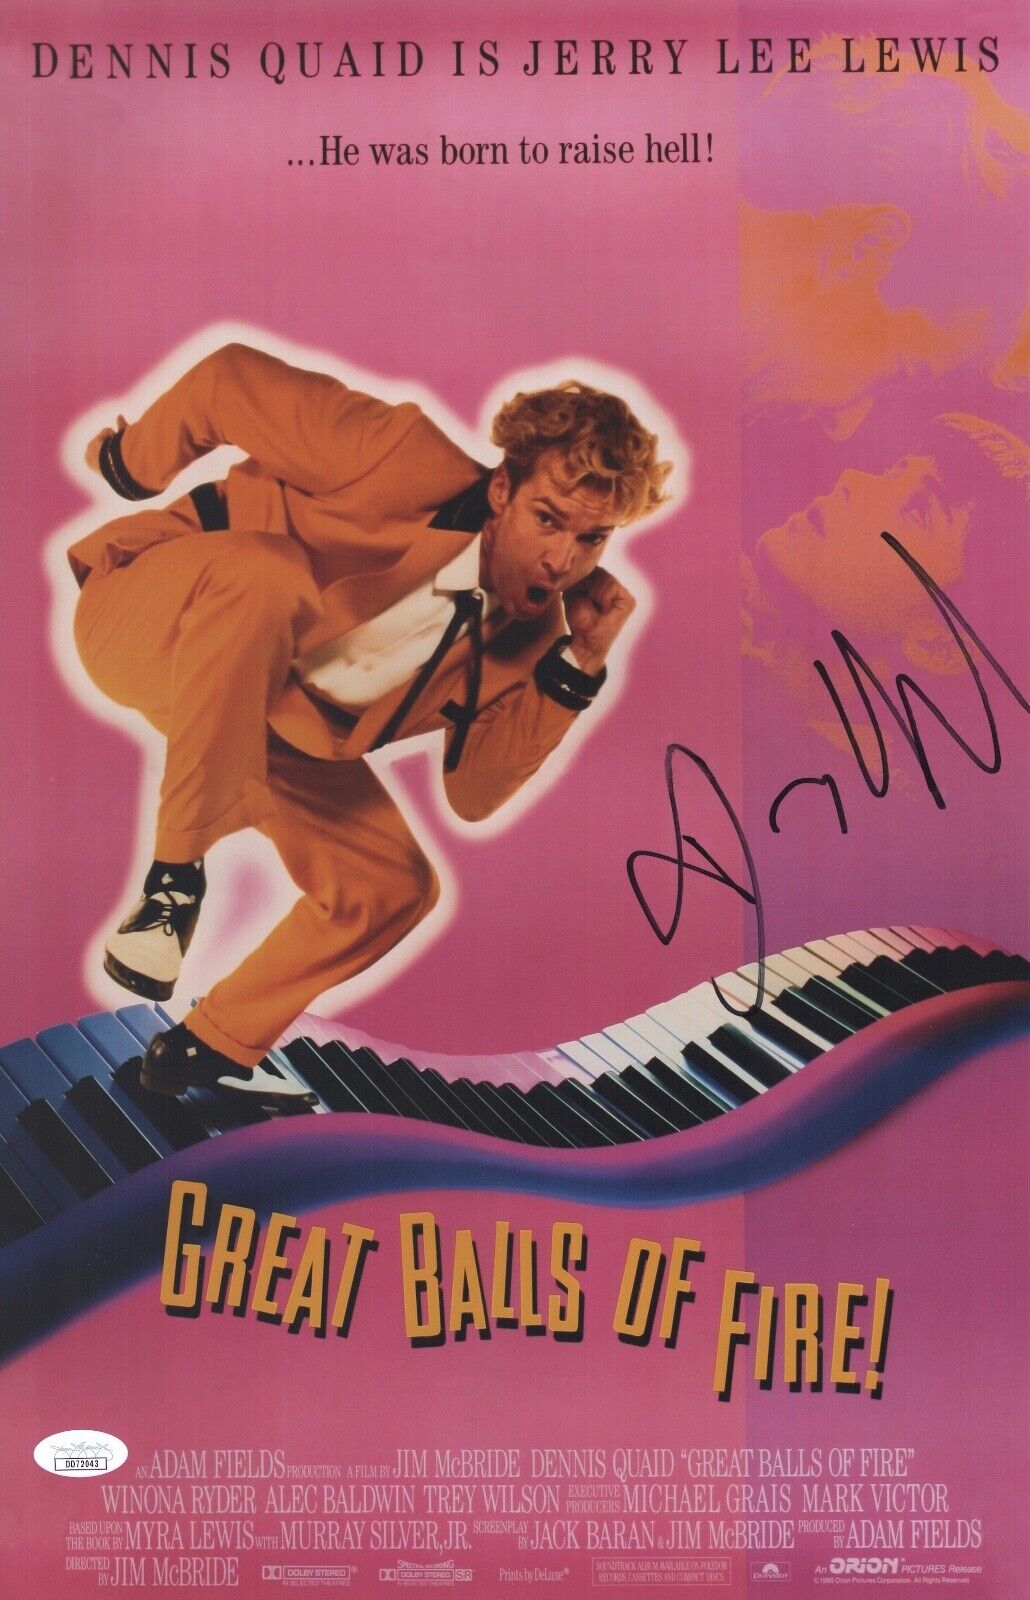 DENNIS QUAID Signed GREAT BALLS OF FIRE! 11x17 Photo Poster painting IN PERSON Autograph JSA COA